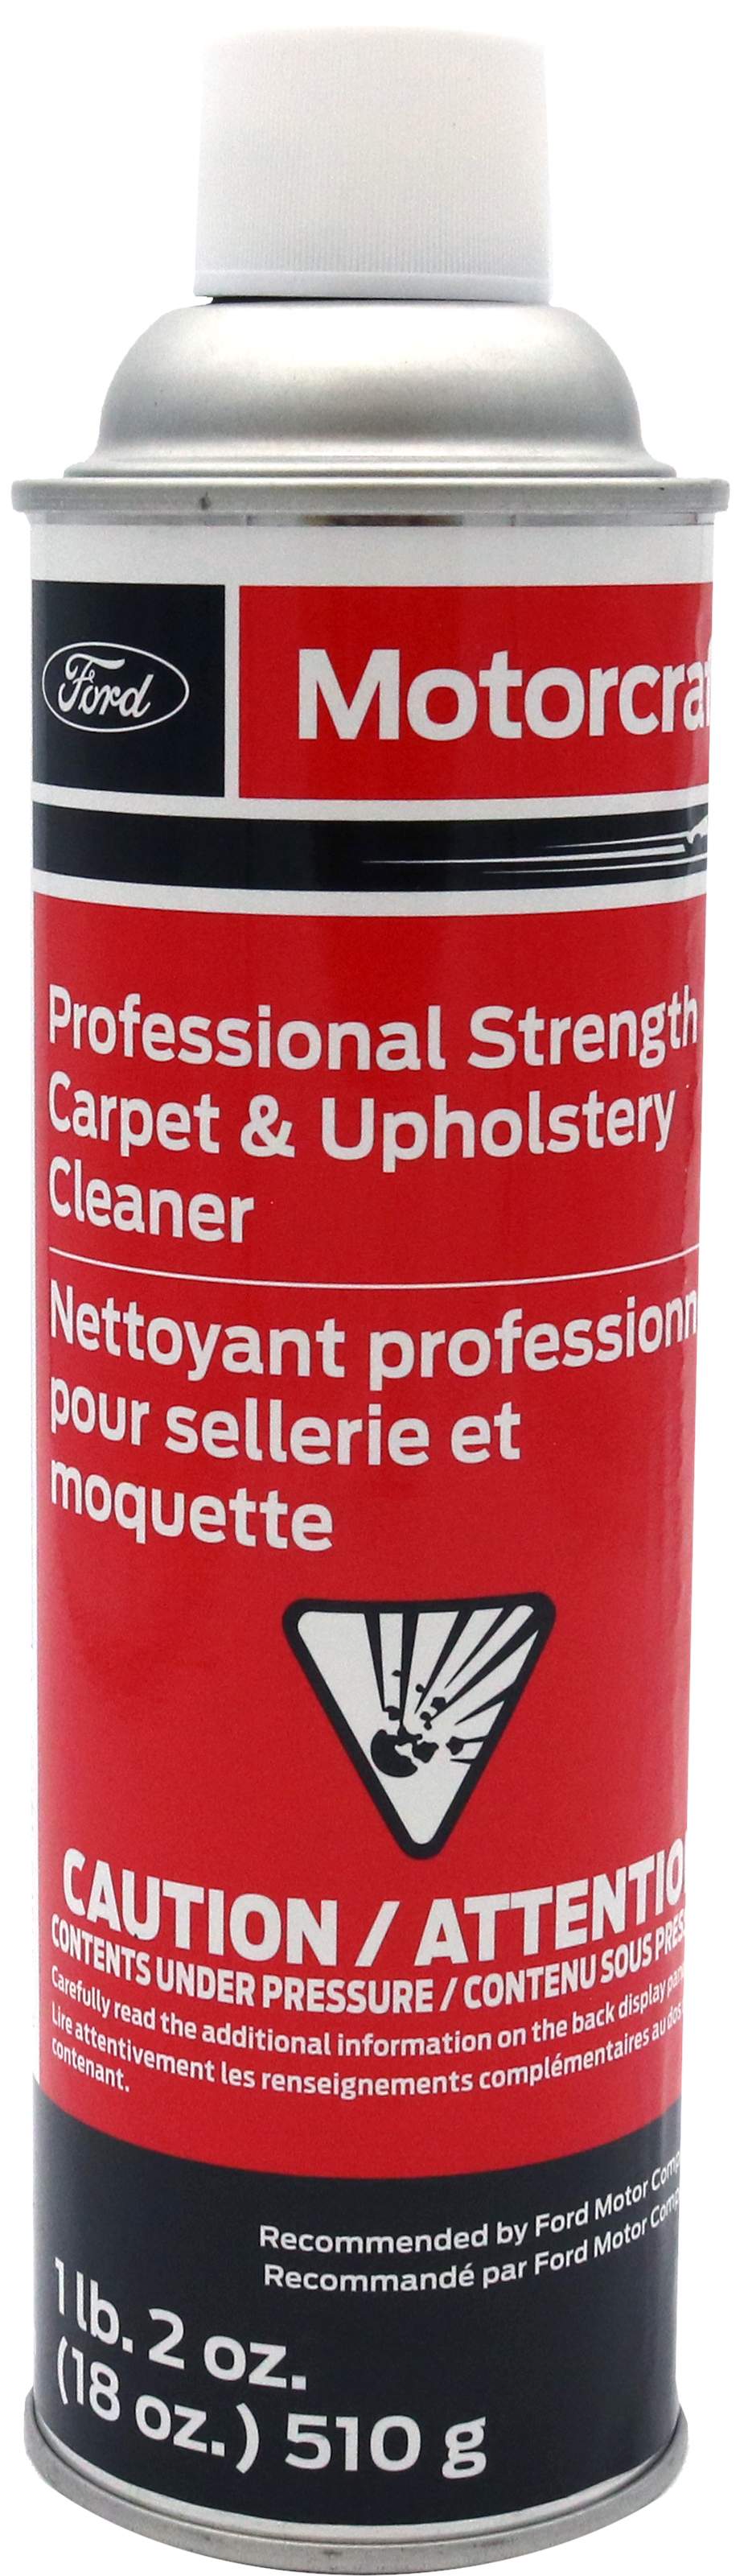 Professional Strength Carpet & Upholstery Cleaner